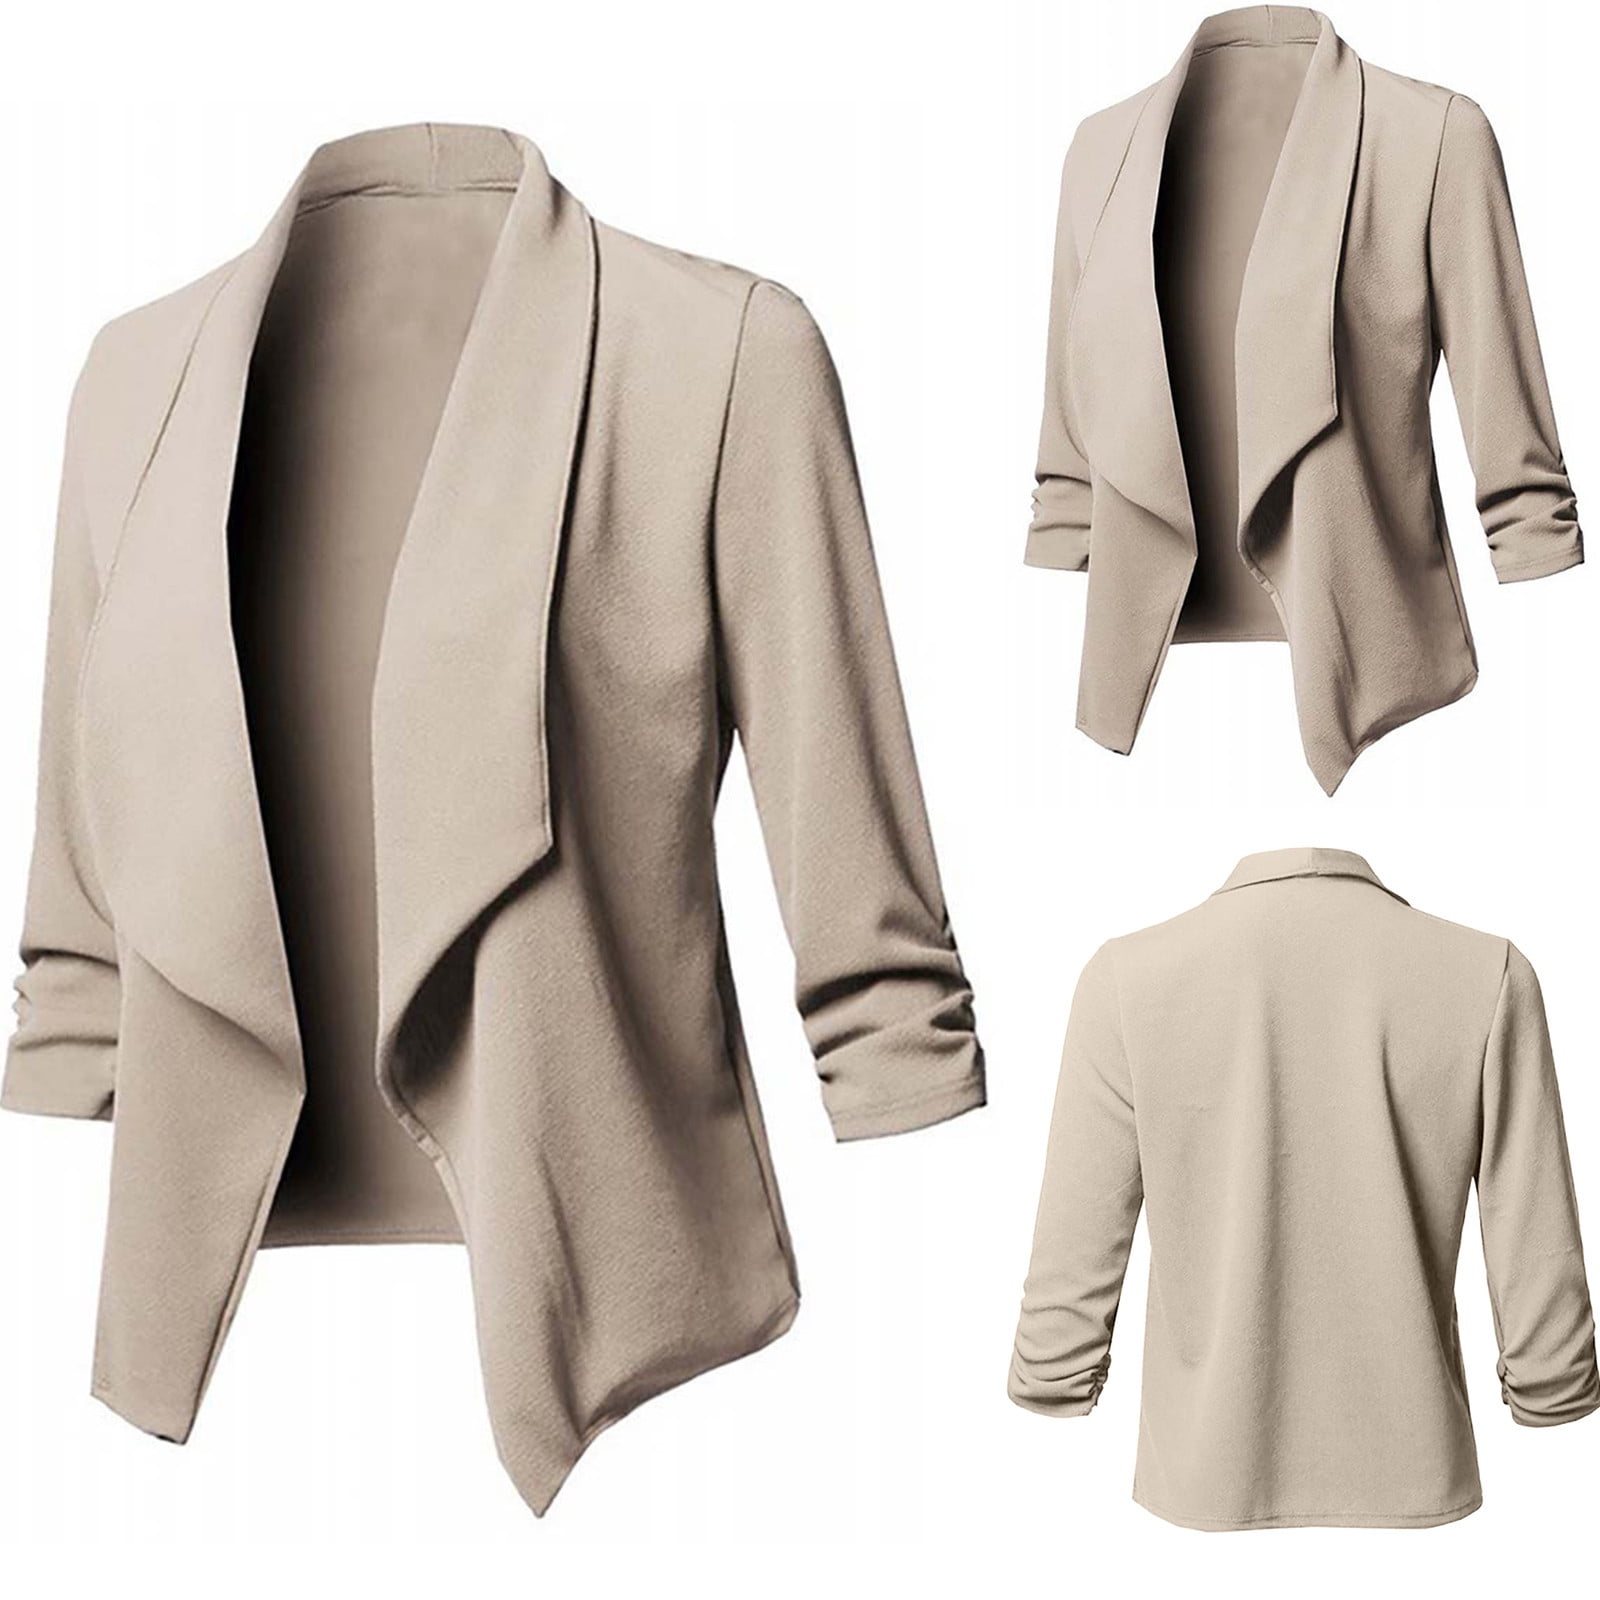 Aboser Womens Blazer Open Front Cropped Suit Jacket Business Casual ...